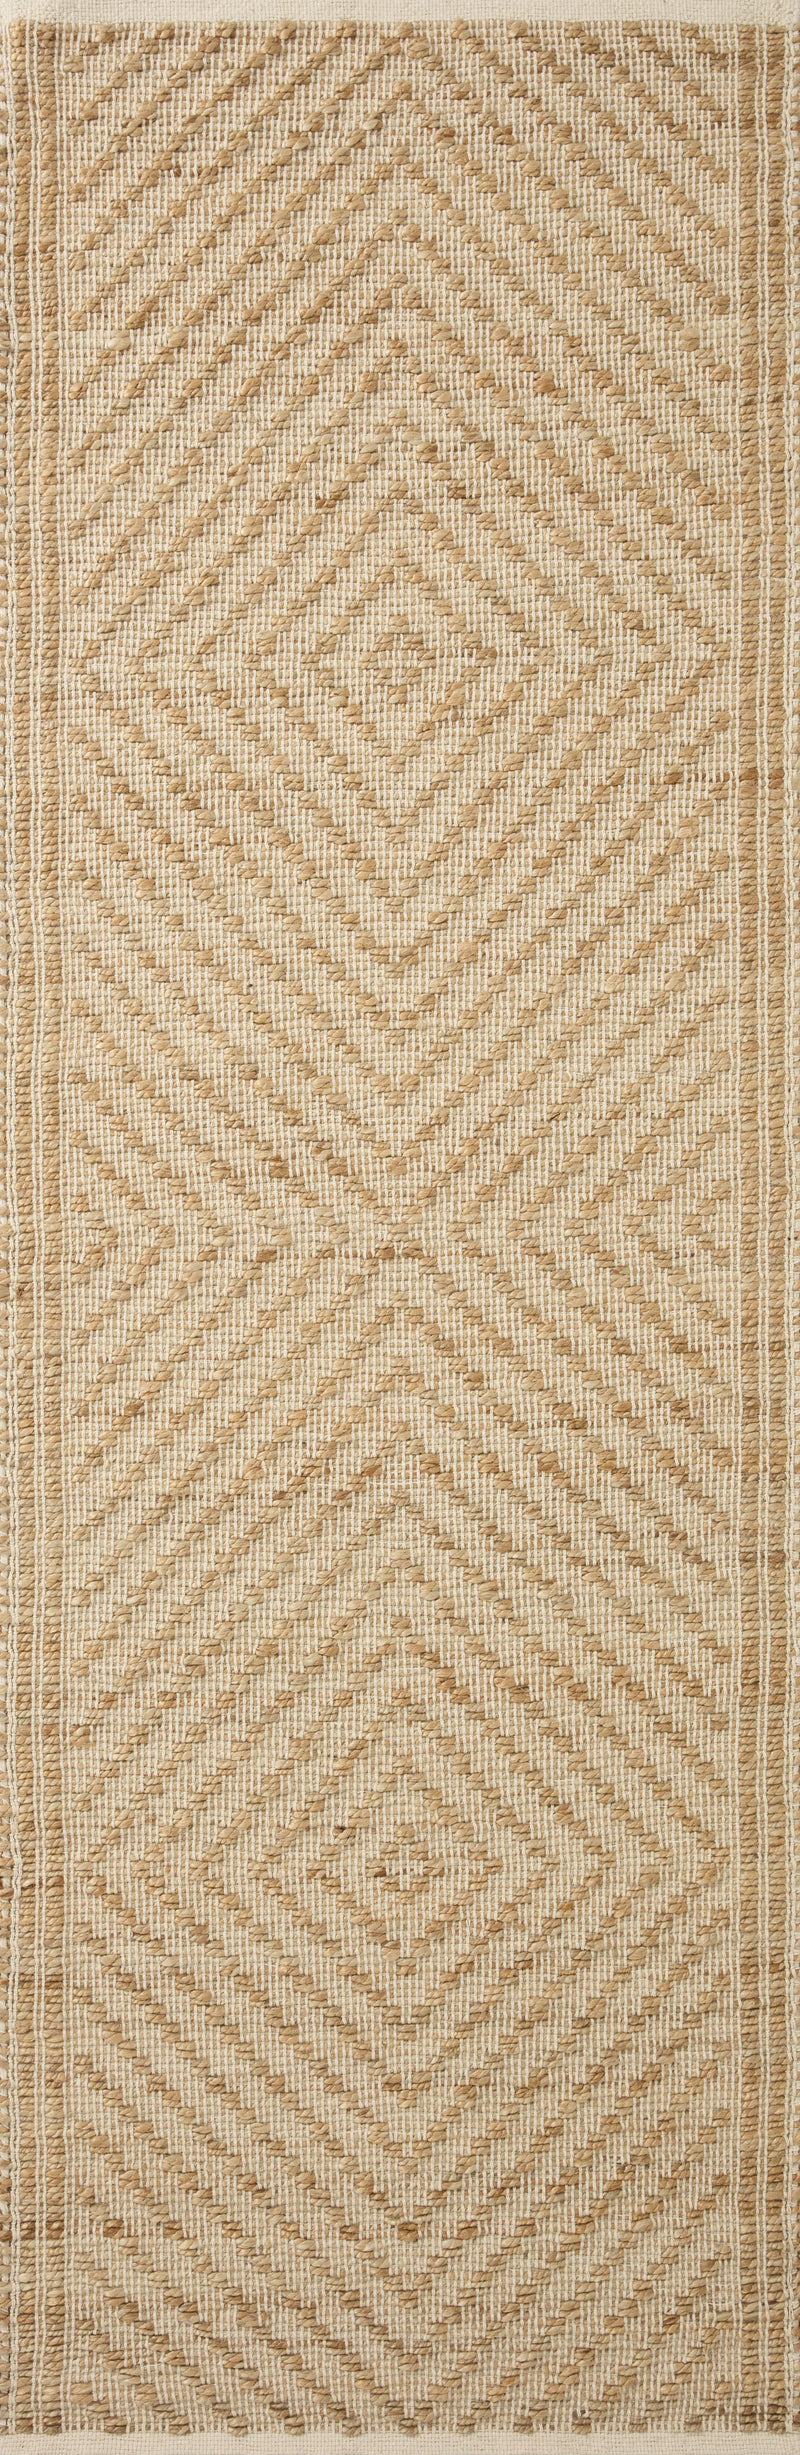 media image for colton hand woven natural ivory rug by angela rose x loloi colocon 04naiv2030 2 235